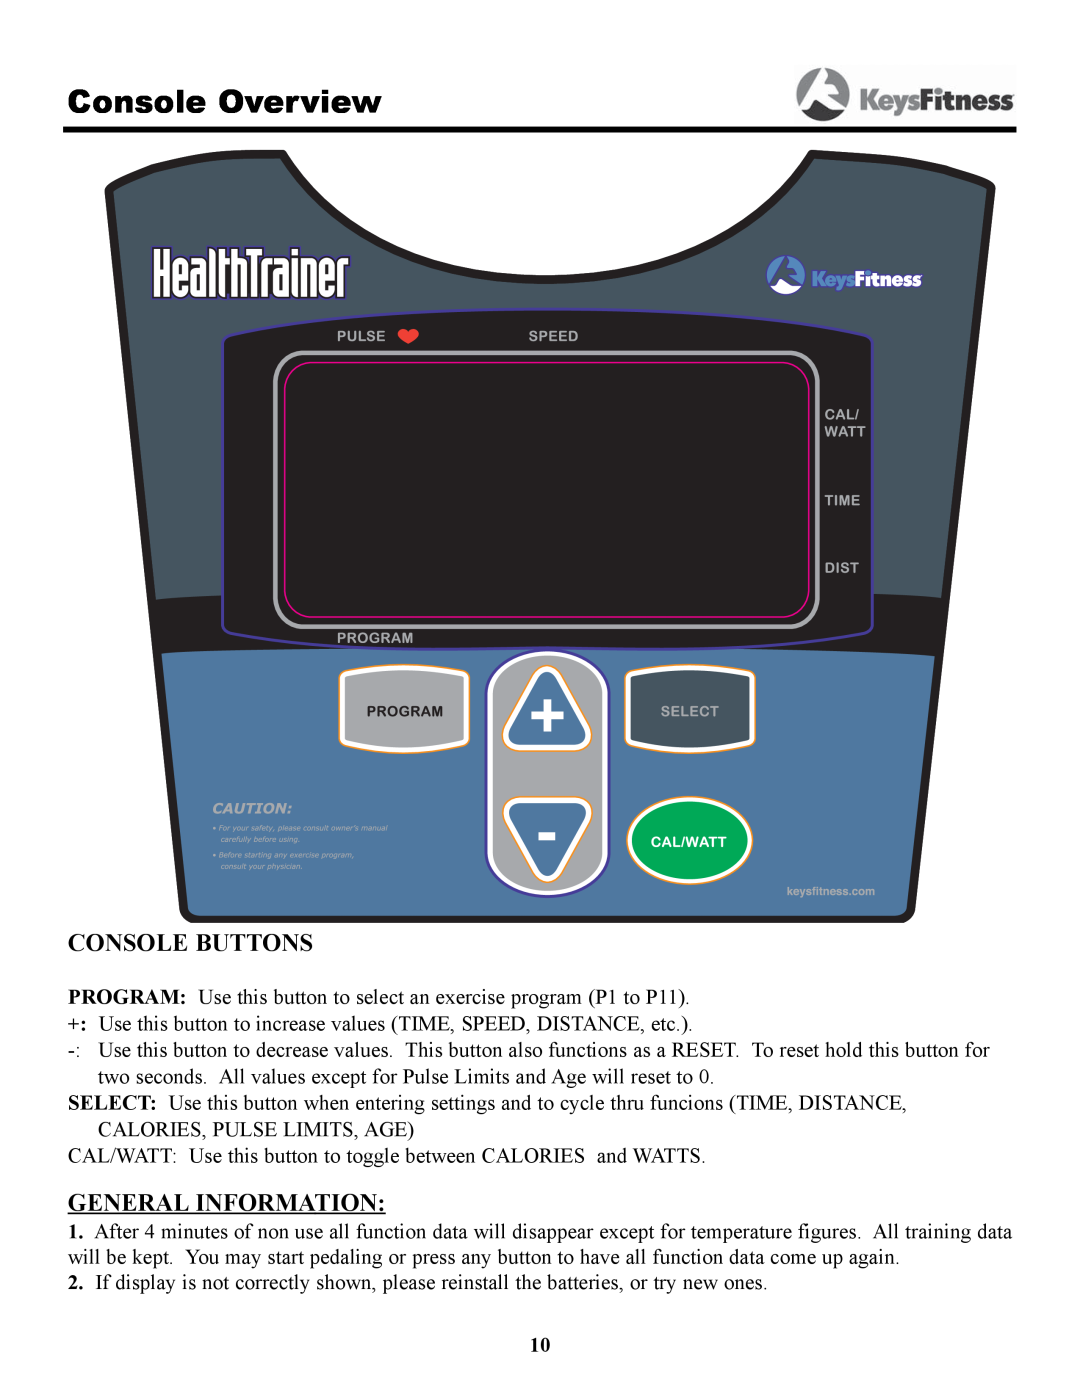 Keys Fitness HT640U owner manual Console Overview, Console Buttons, General Information 